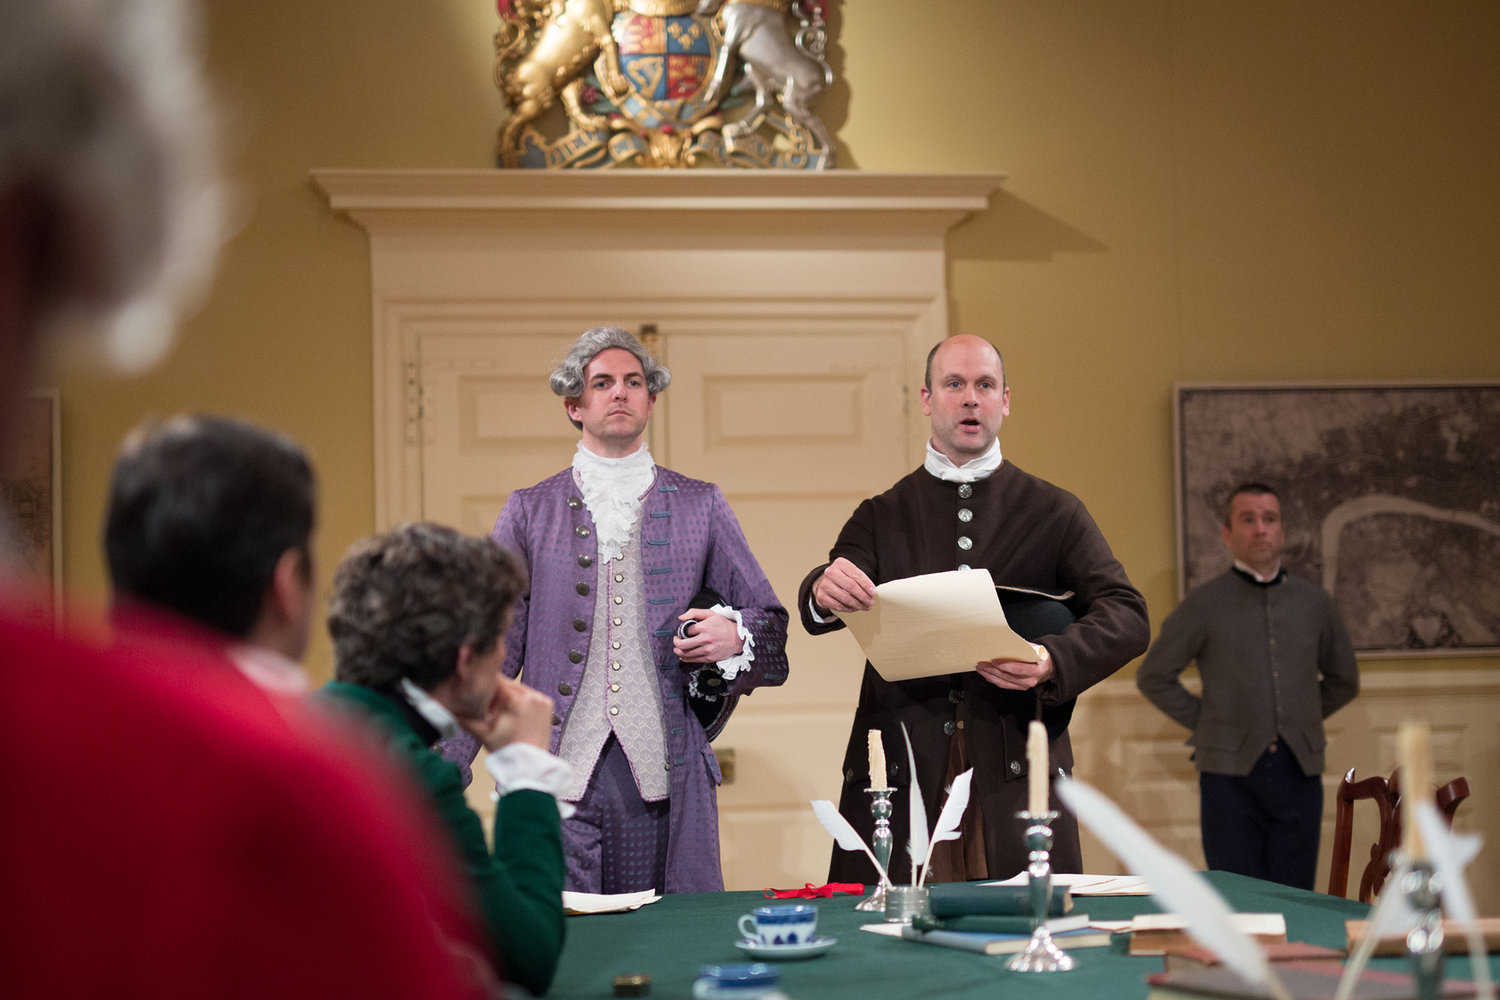 John Hancock (Matt Ryan) and Samuel Adams (Craig Ciampa) in &quot;Blood on the Snow&quot; in the Old State House. (Courtesy Justin Saglio/Bostonian Society)